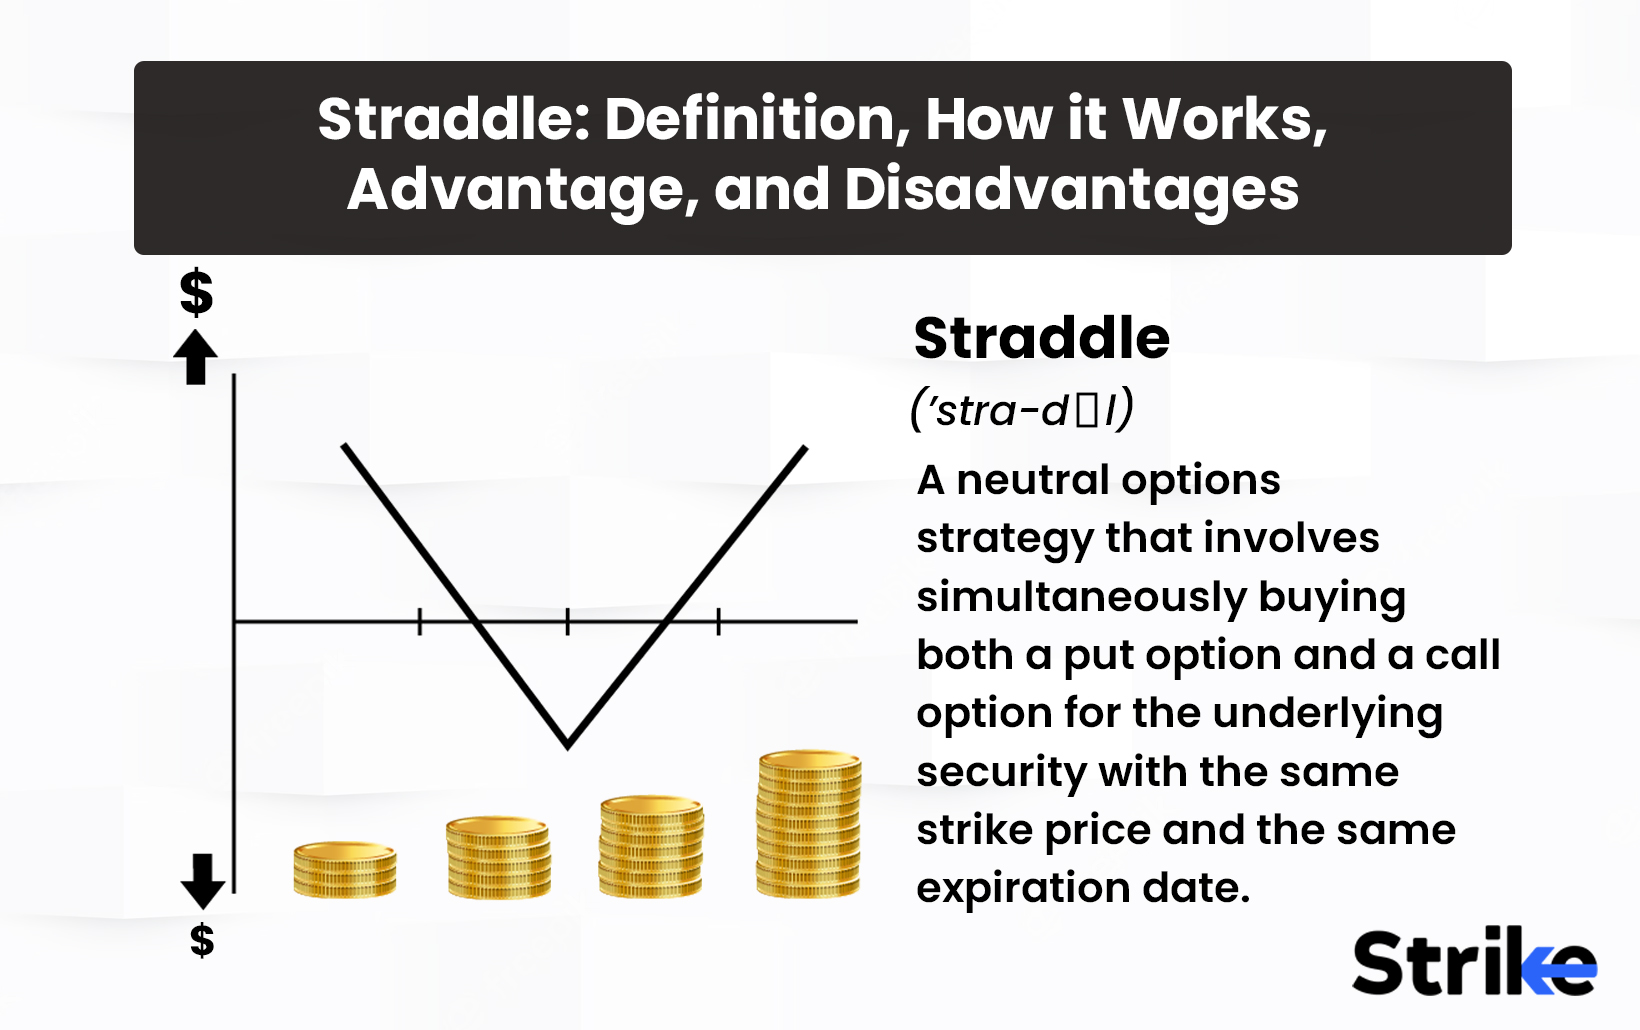 Straddle: Definition, How it Works, Advantage, and Disadvantages